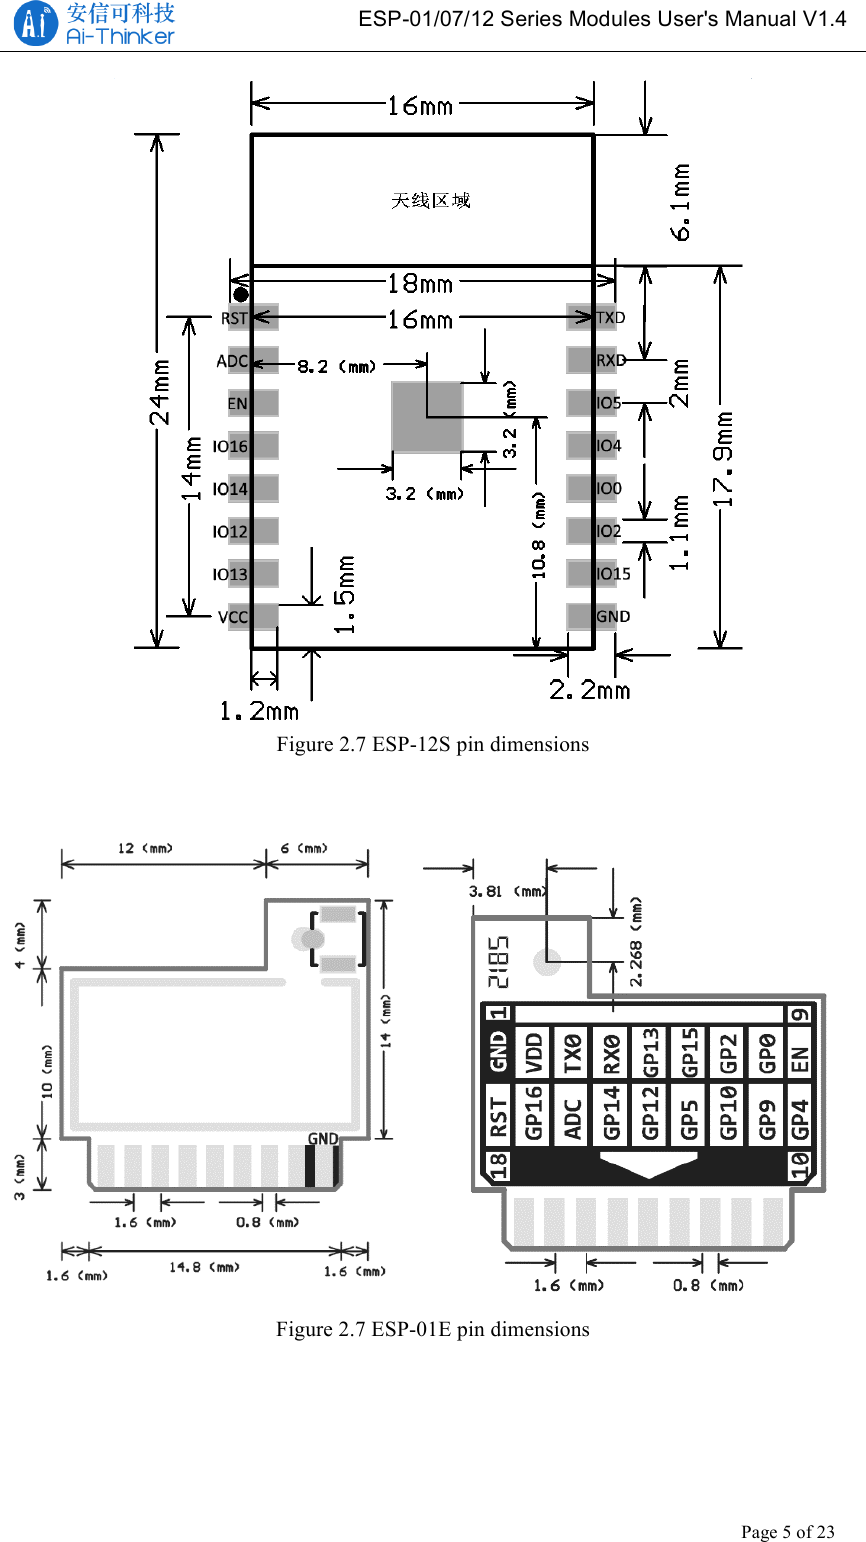   ESP-01/07/12 Series Modules User&apos;s Manual V1.4 Copyright © 2017 Shenzhen Ai-Thinker Technology Co., Ltd All Rights Reserved Page 5 of 23   Figure 2.7 ESP-12S pin dimensions   Figure 2.7 ESP-01E pin dimensions      